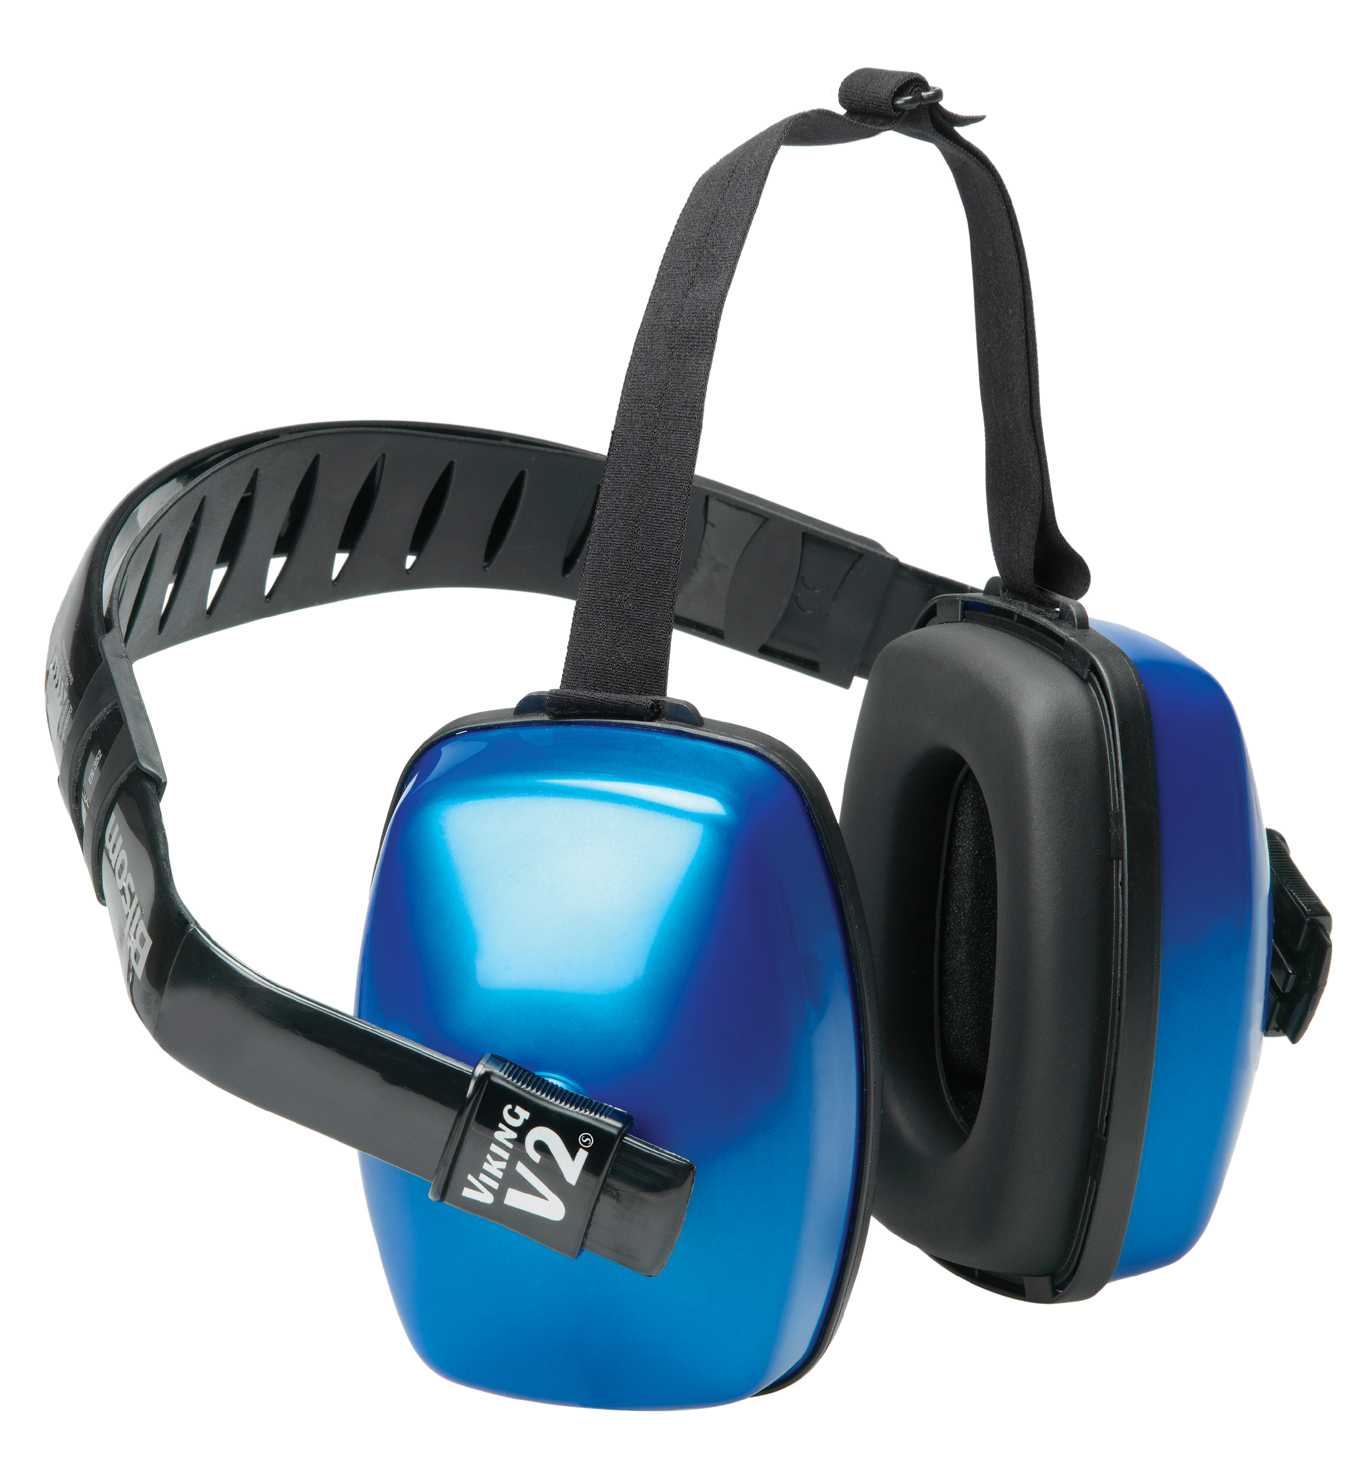 Bilsom has upgraded its popular Viking(tm) Series noise blocking earmuffs to incorporate its patented Air Flow Control(tm) technology (AFC), which delivers optimal attenuation across all frequencies without increasing earcup size or weight. Viking Series multi-position headbands give workers the fle